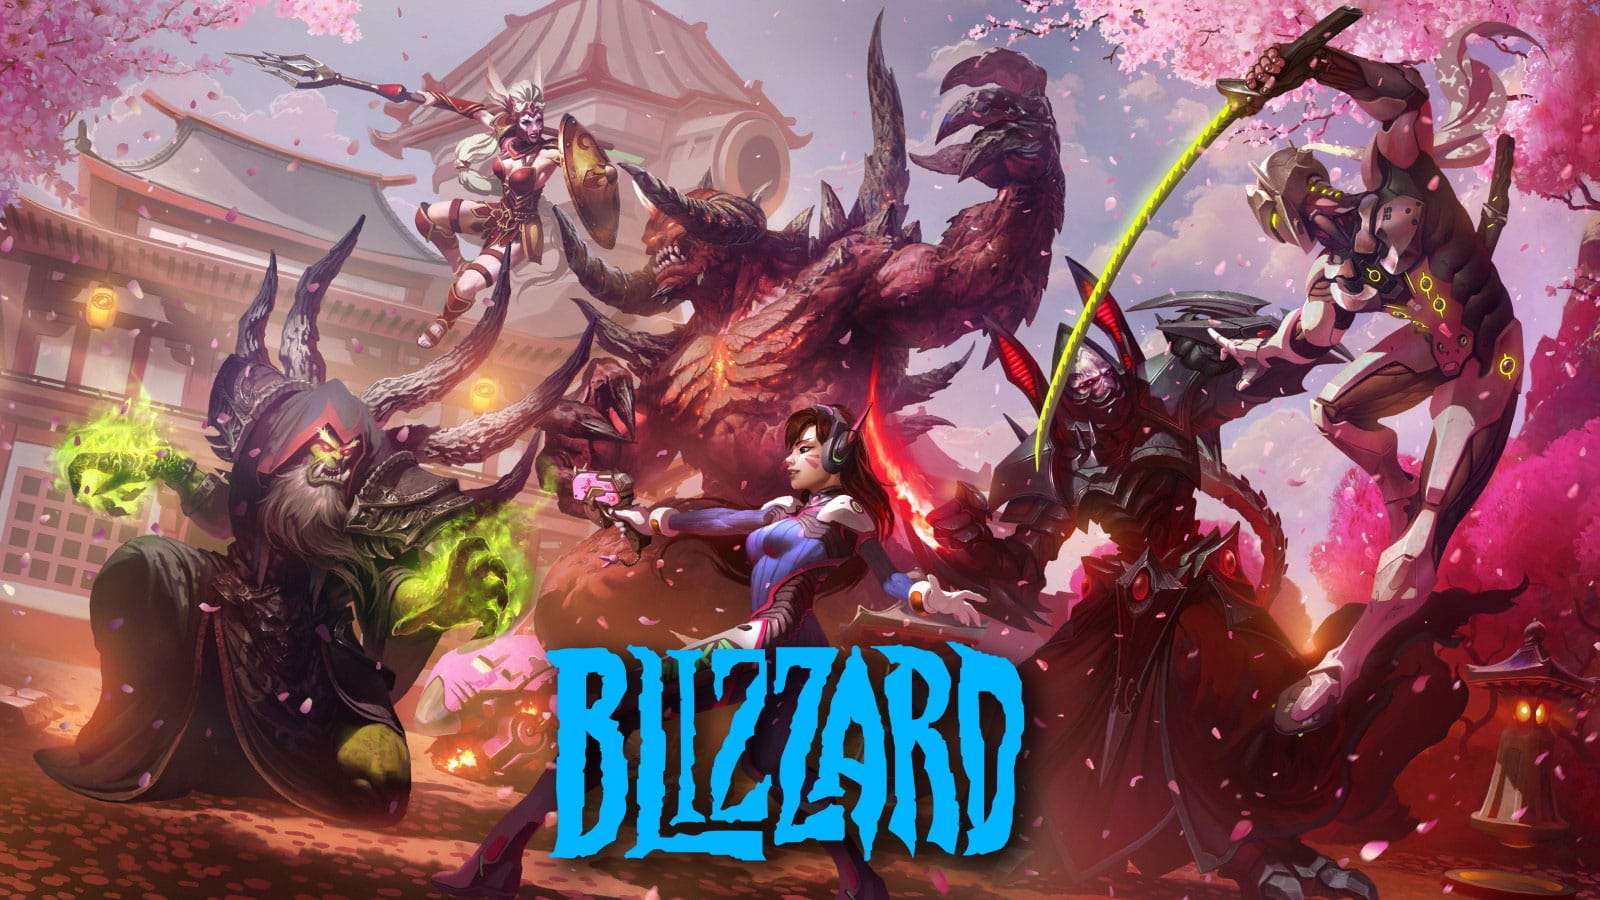 Blizzard characters